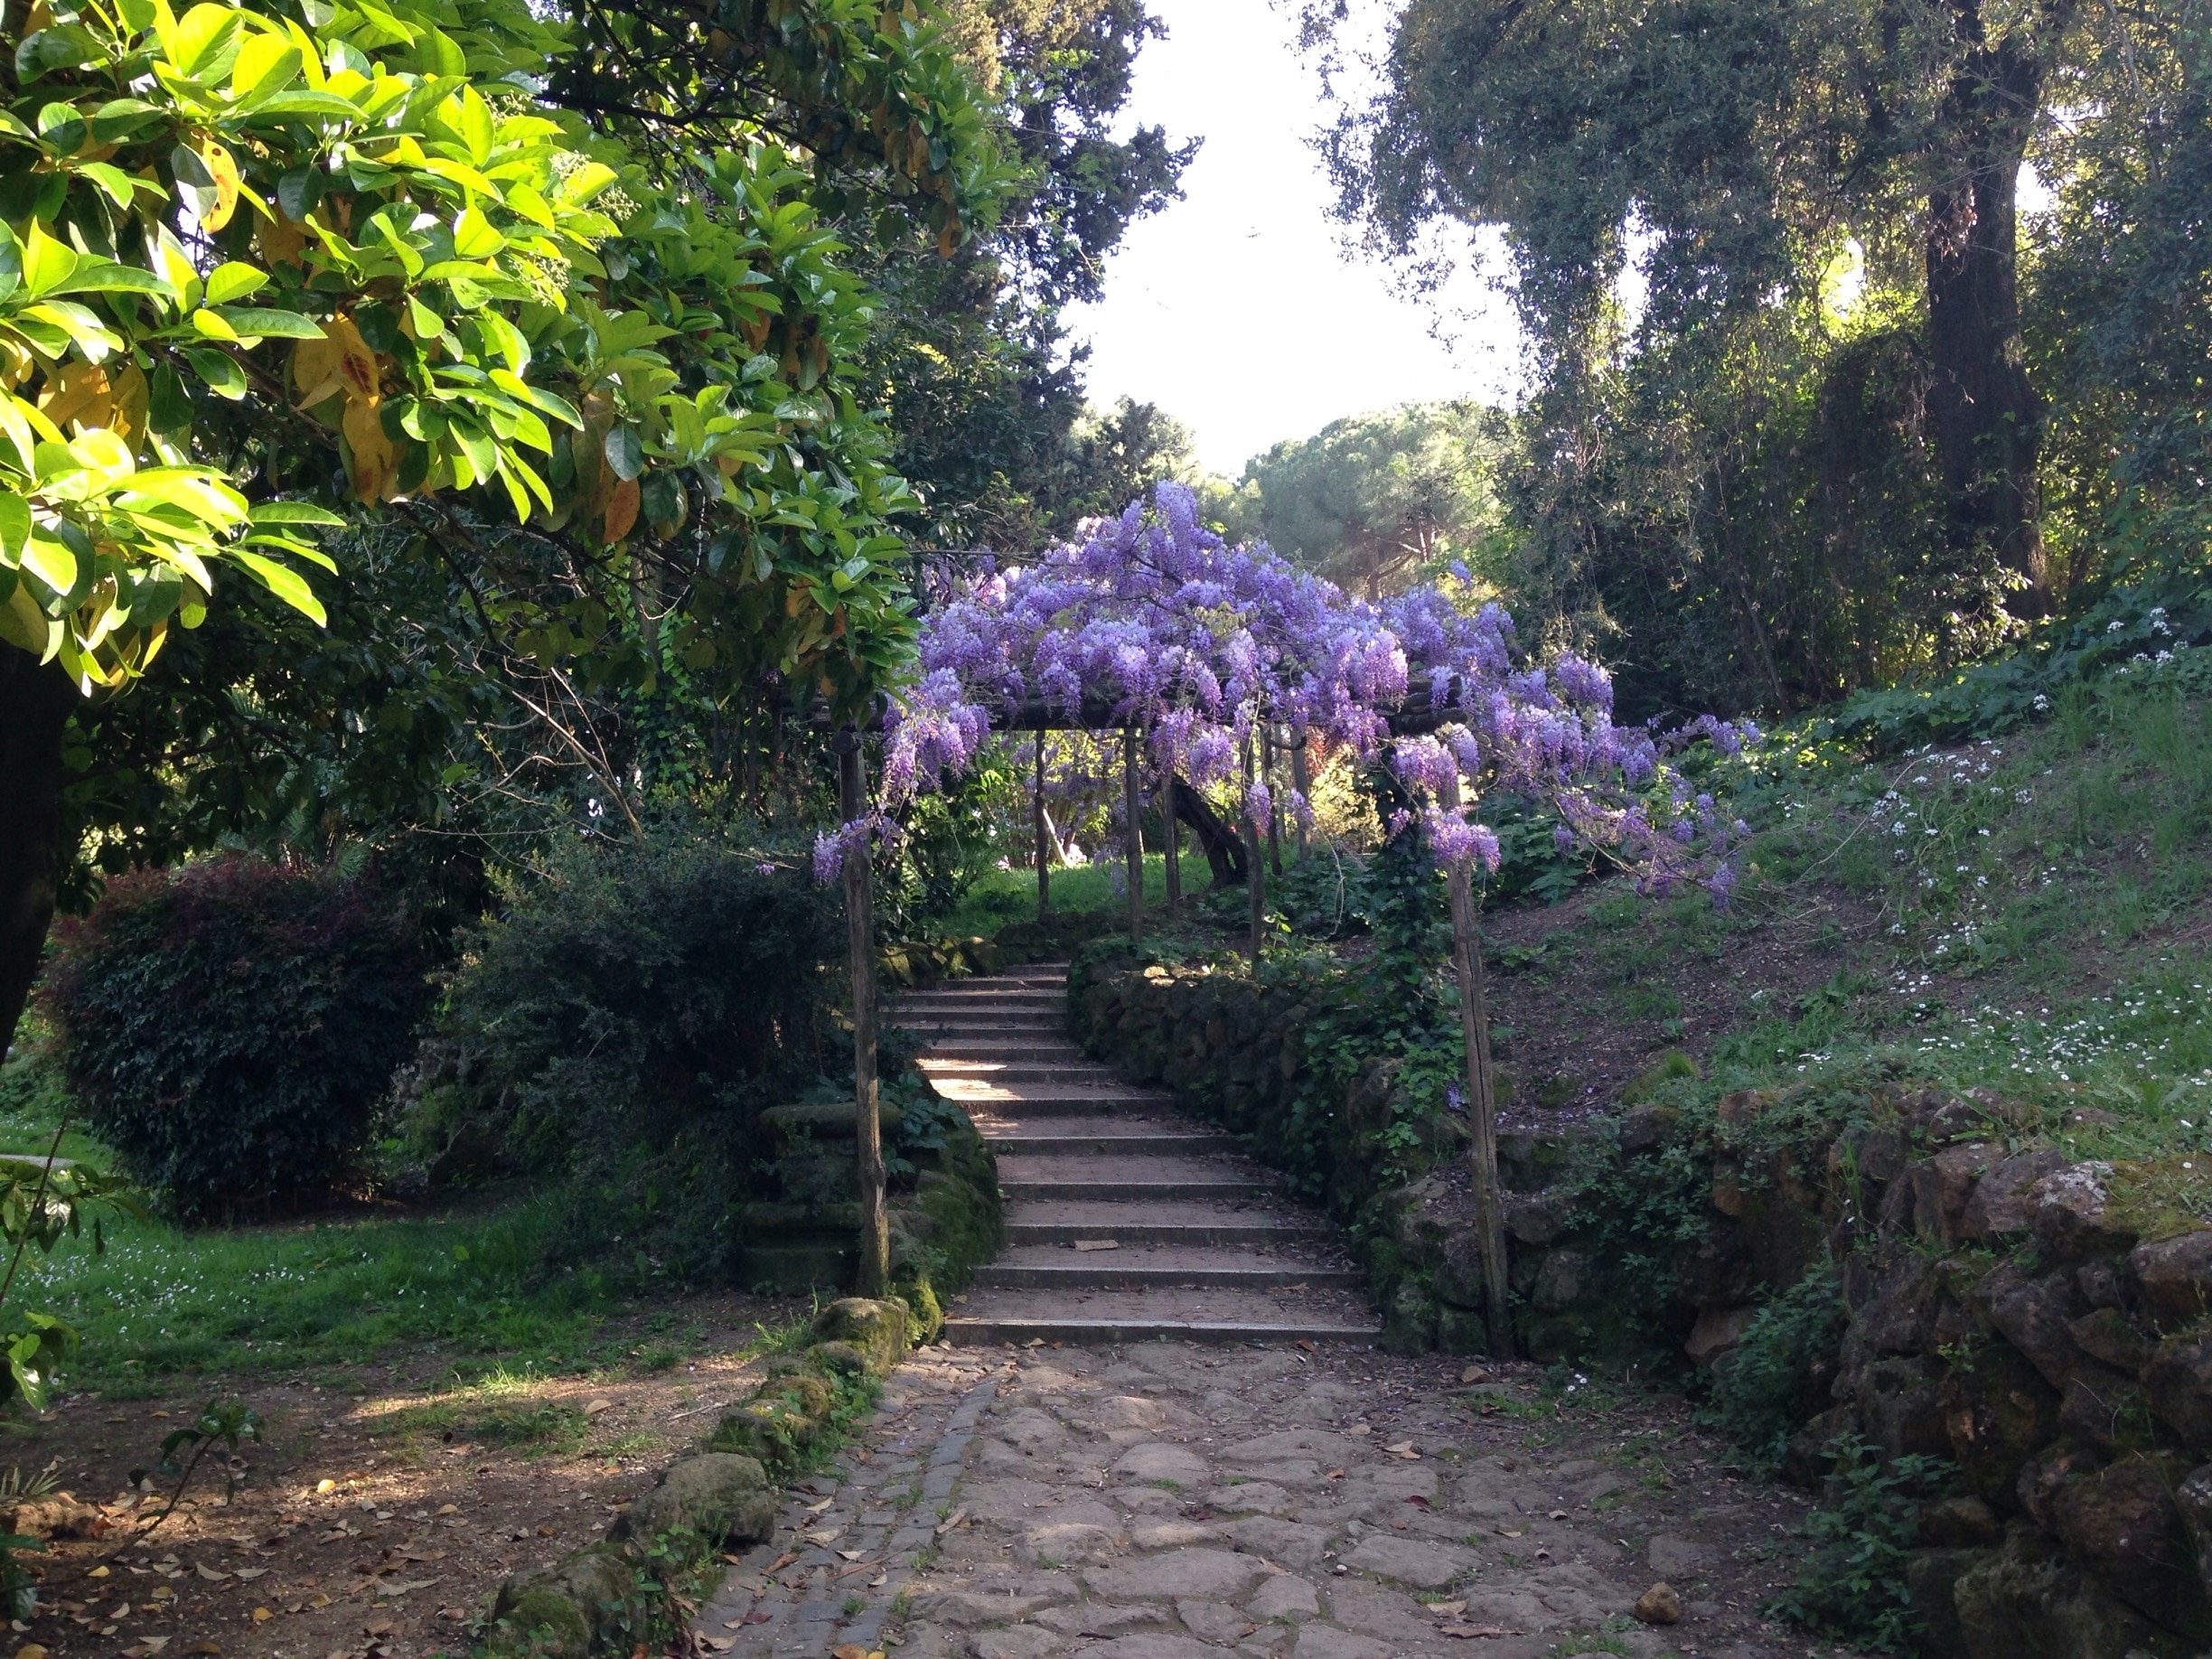 This is my favorite spot in all of Rome. In the spring it's at its best, because the fountains are on and the flowers will be blooming. I like it a lot better than Villa Borghese because its less crowded, and you still can get a great view of the city! There's also usually a lot of dogs here too, which is great 